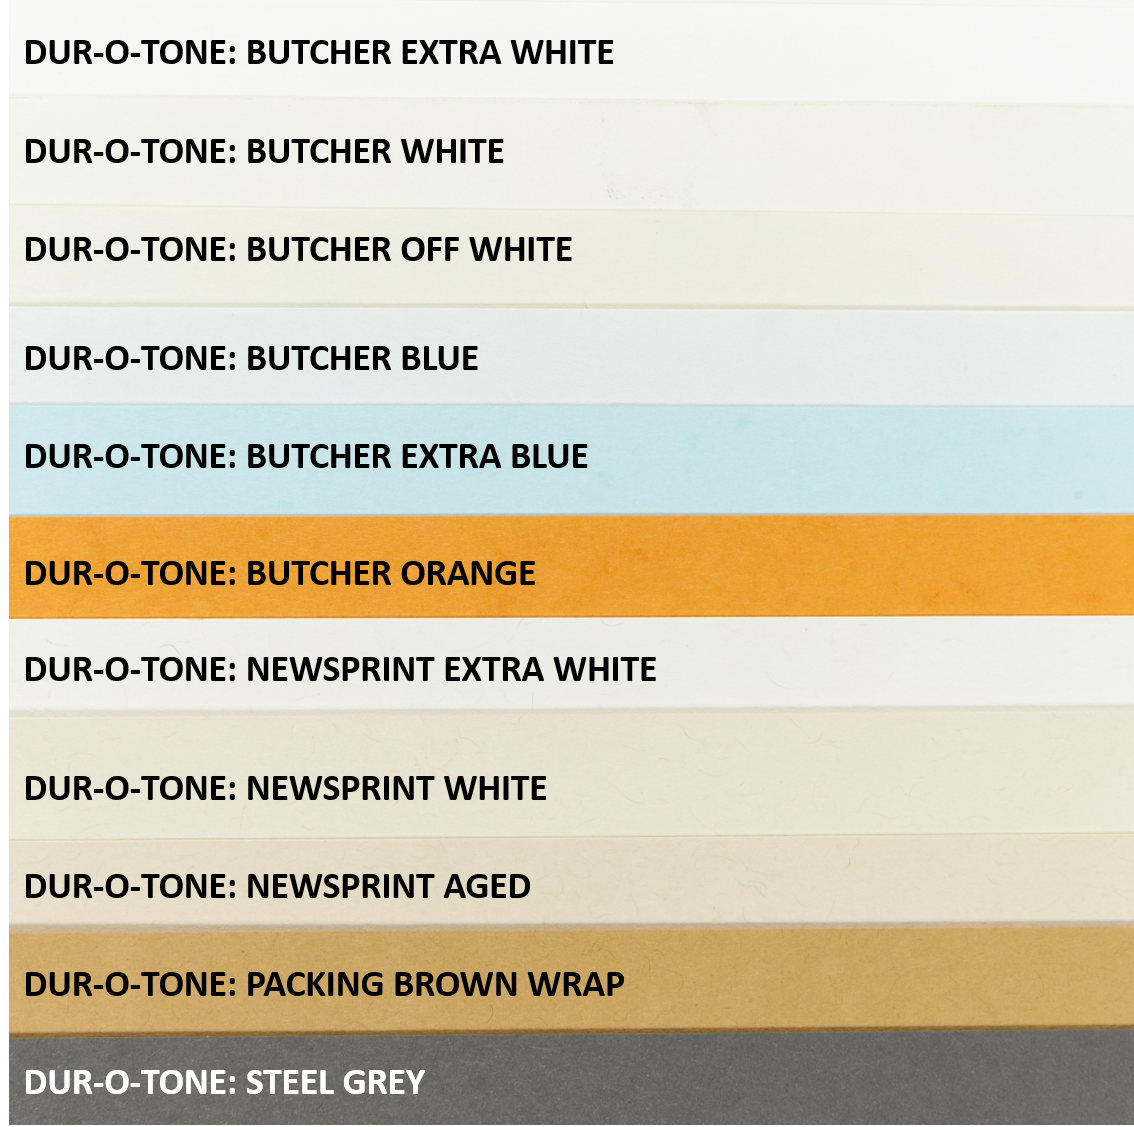 Butcher Orange Cardstock (Dur-O-Tone, Cover Weight)